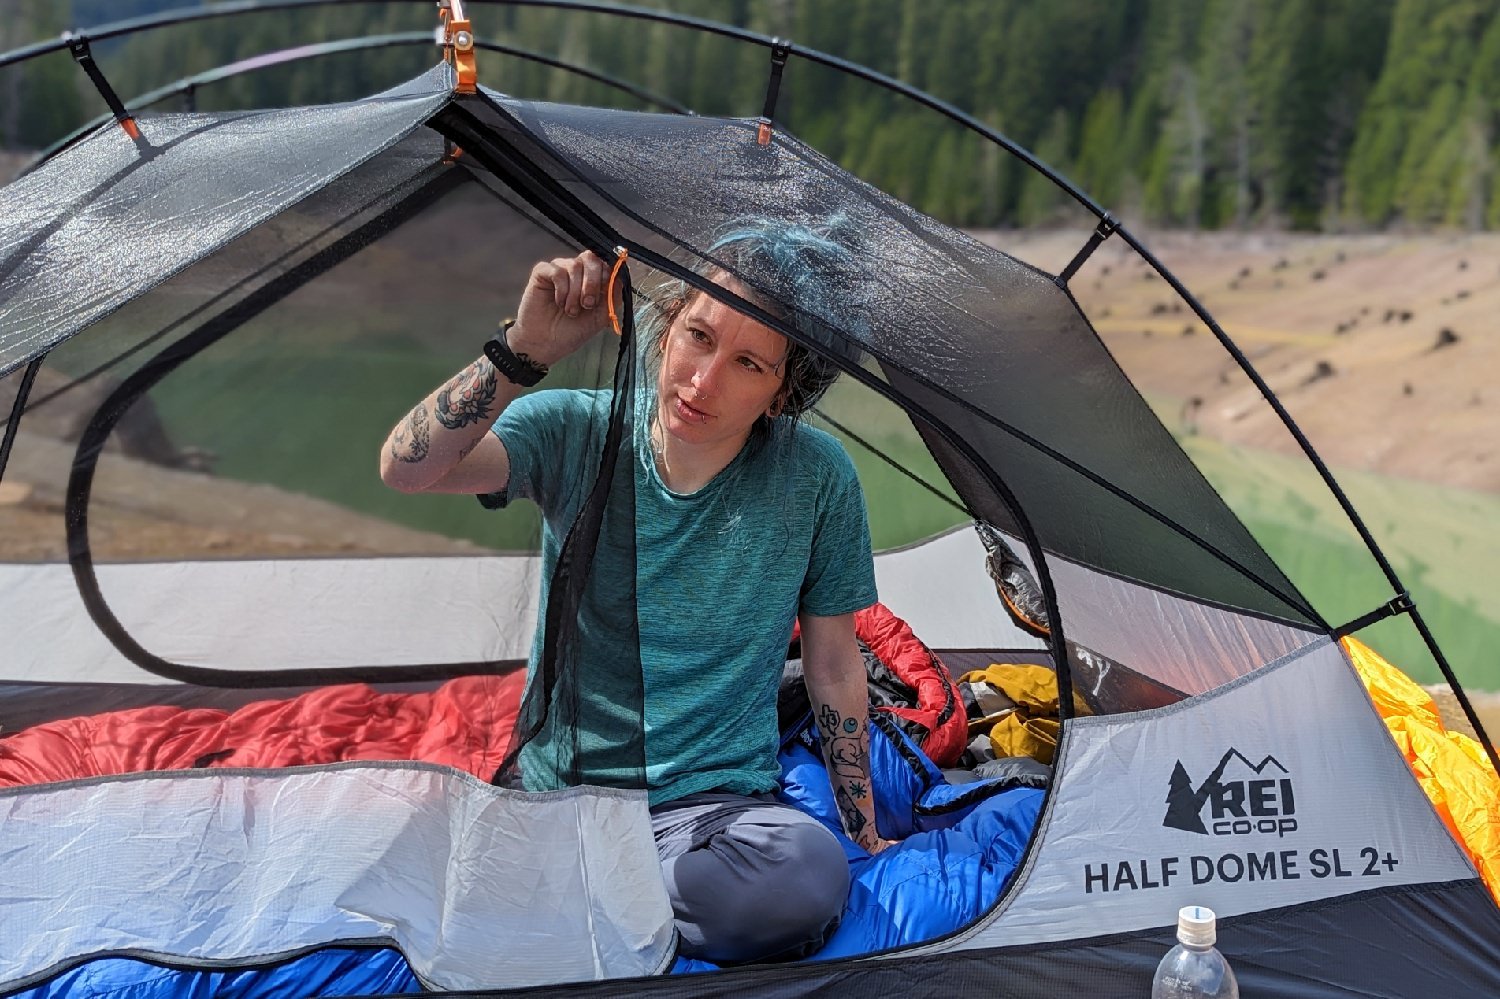 A hiker sitting inside the REI half Dome SL 2 - the door zipper is half open and they are zipping it closed with one hand